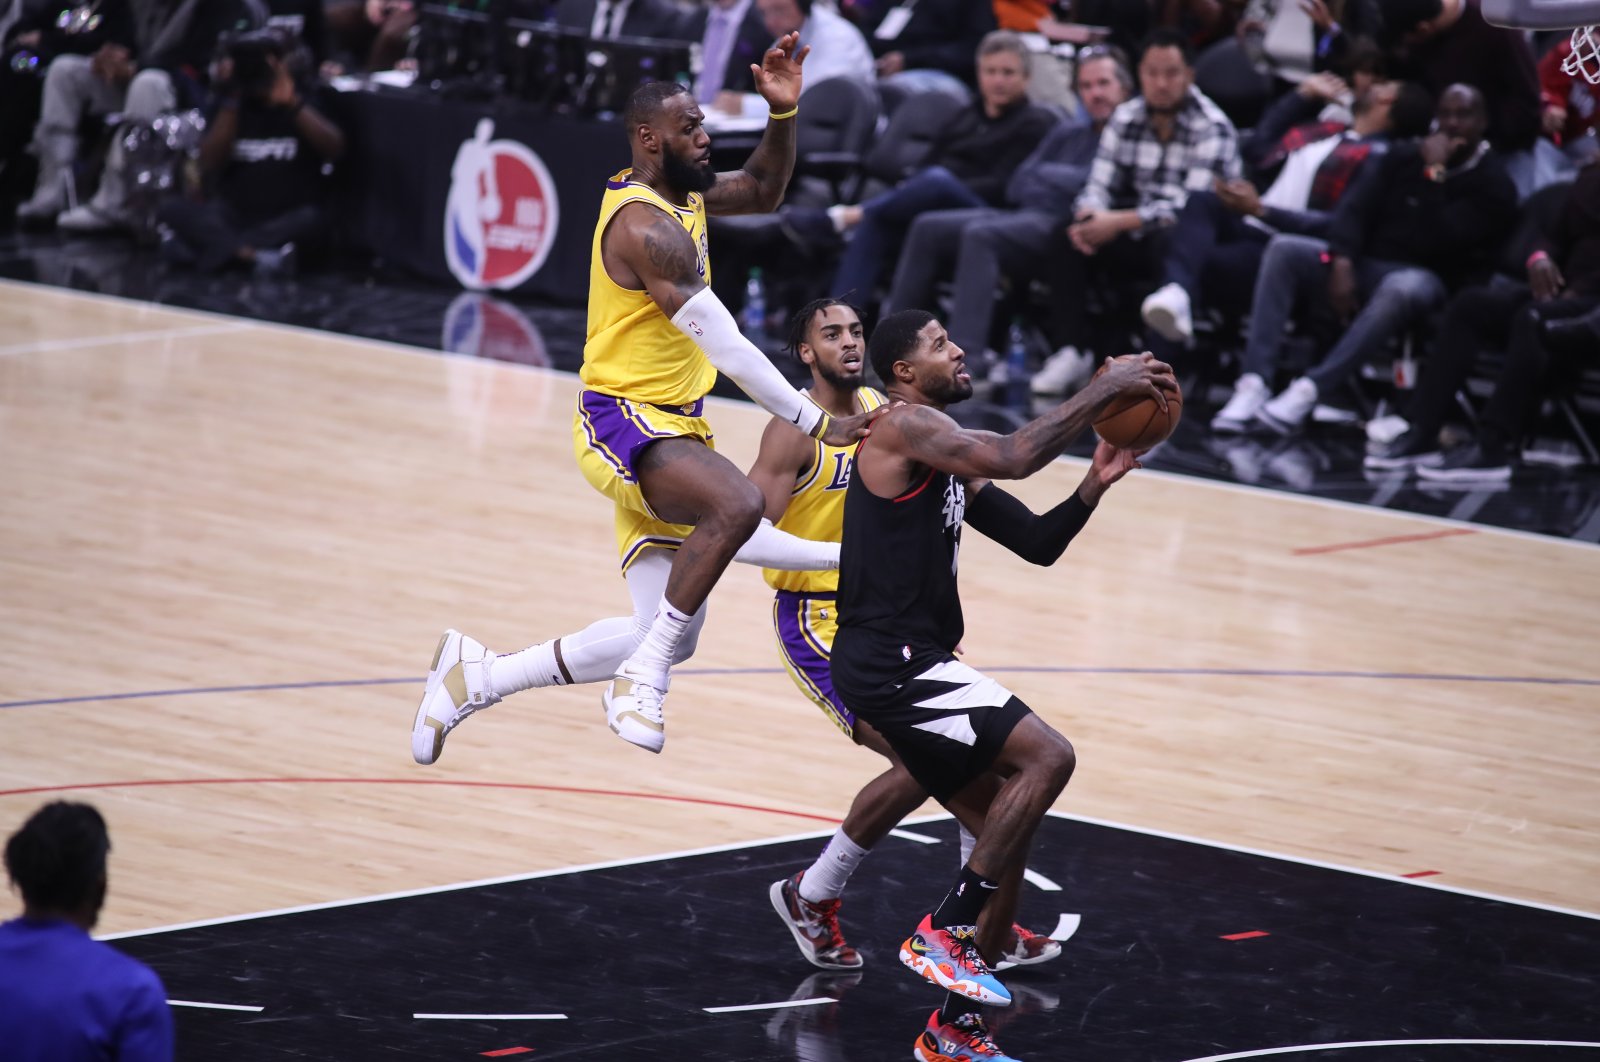 Los Angeles Clippers guard Paul George gets fouled by Los Angeles Lakers forward LeBron James during the NBA game between the Los Angeles Lakers and the Los Angeles Clippers at Crypto.com Arena, Los Angeles, California, U.S., Nov. 9, 2022. (Getty Images Photo)